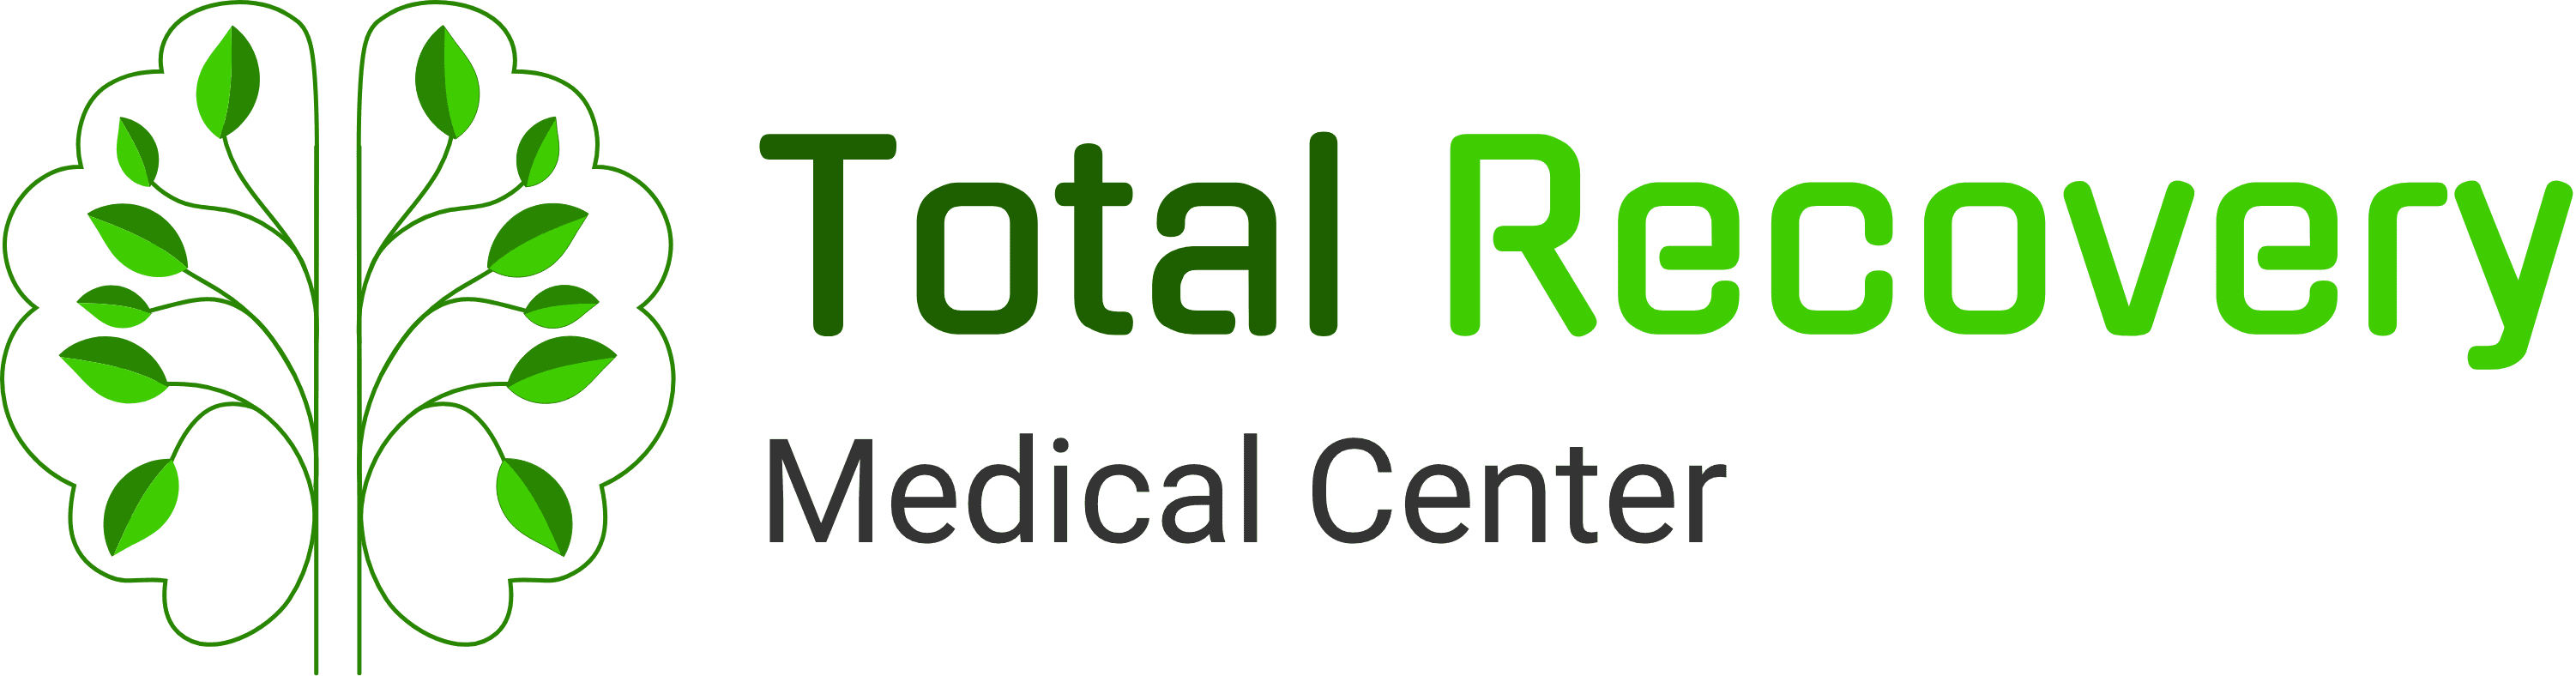 total recovery medical center